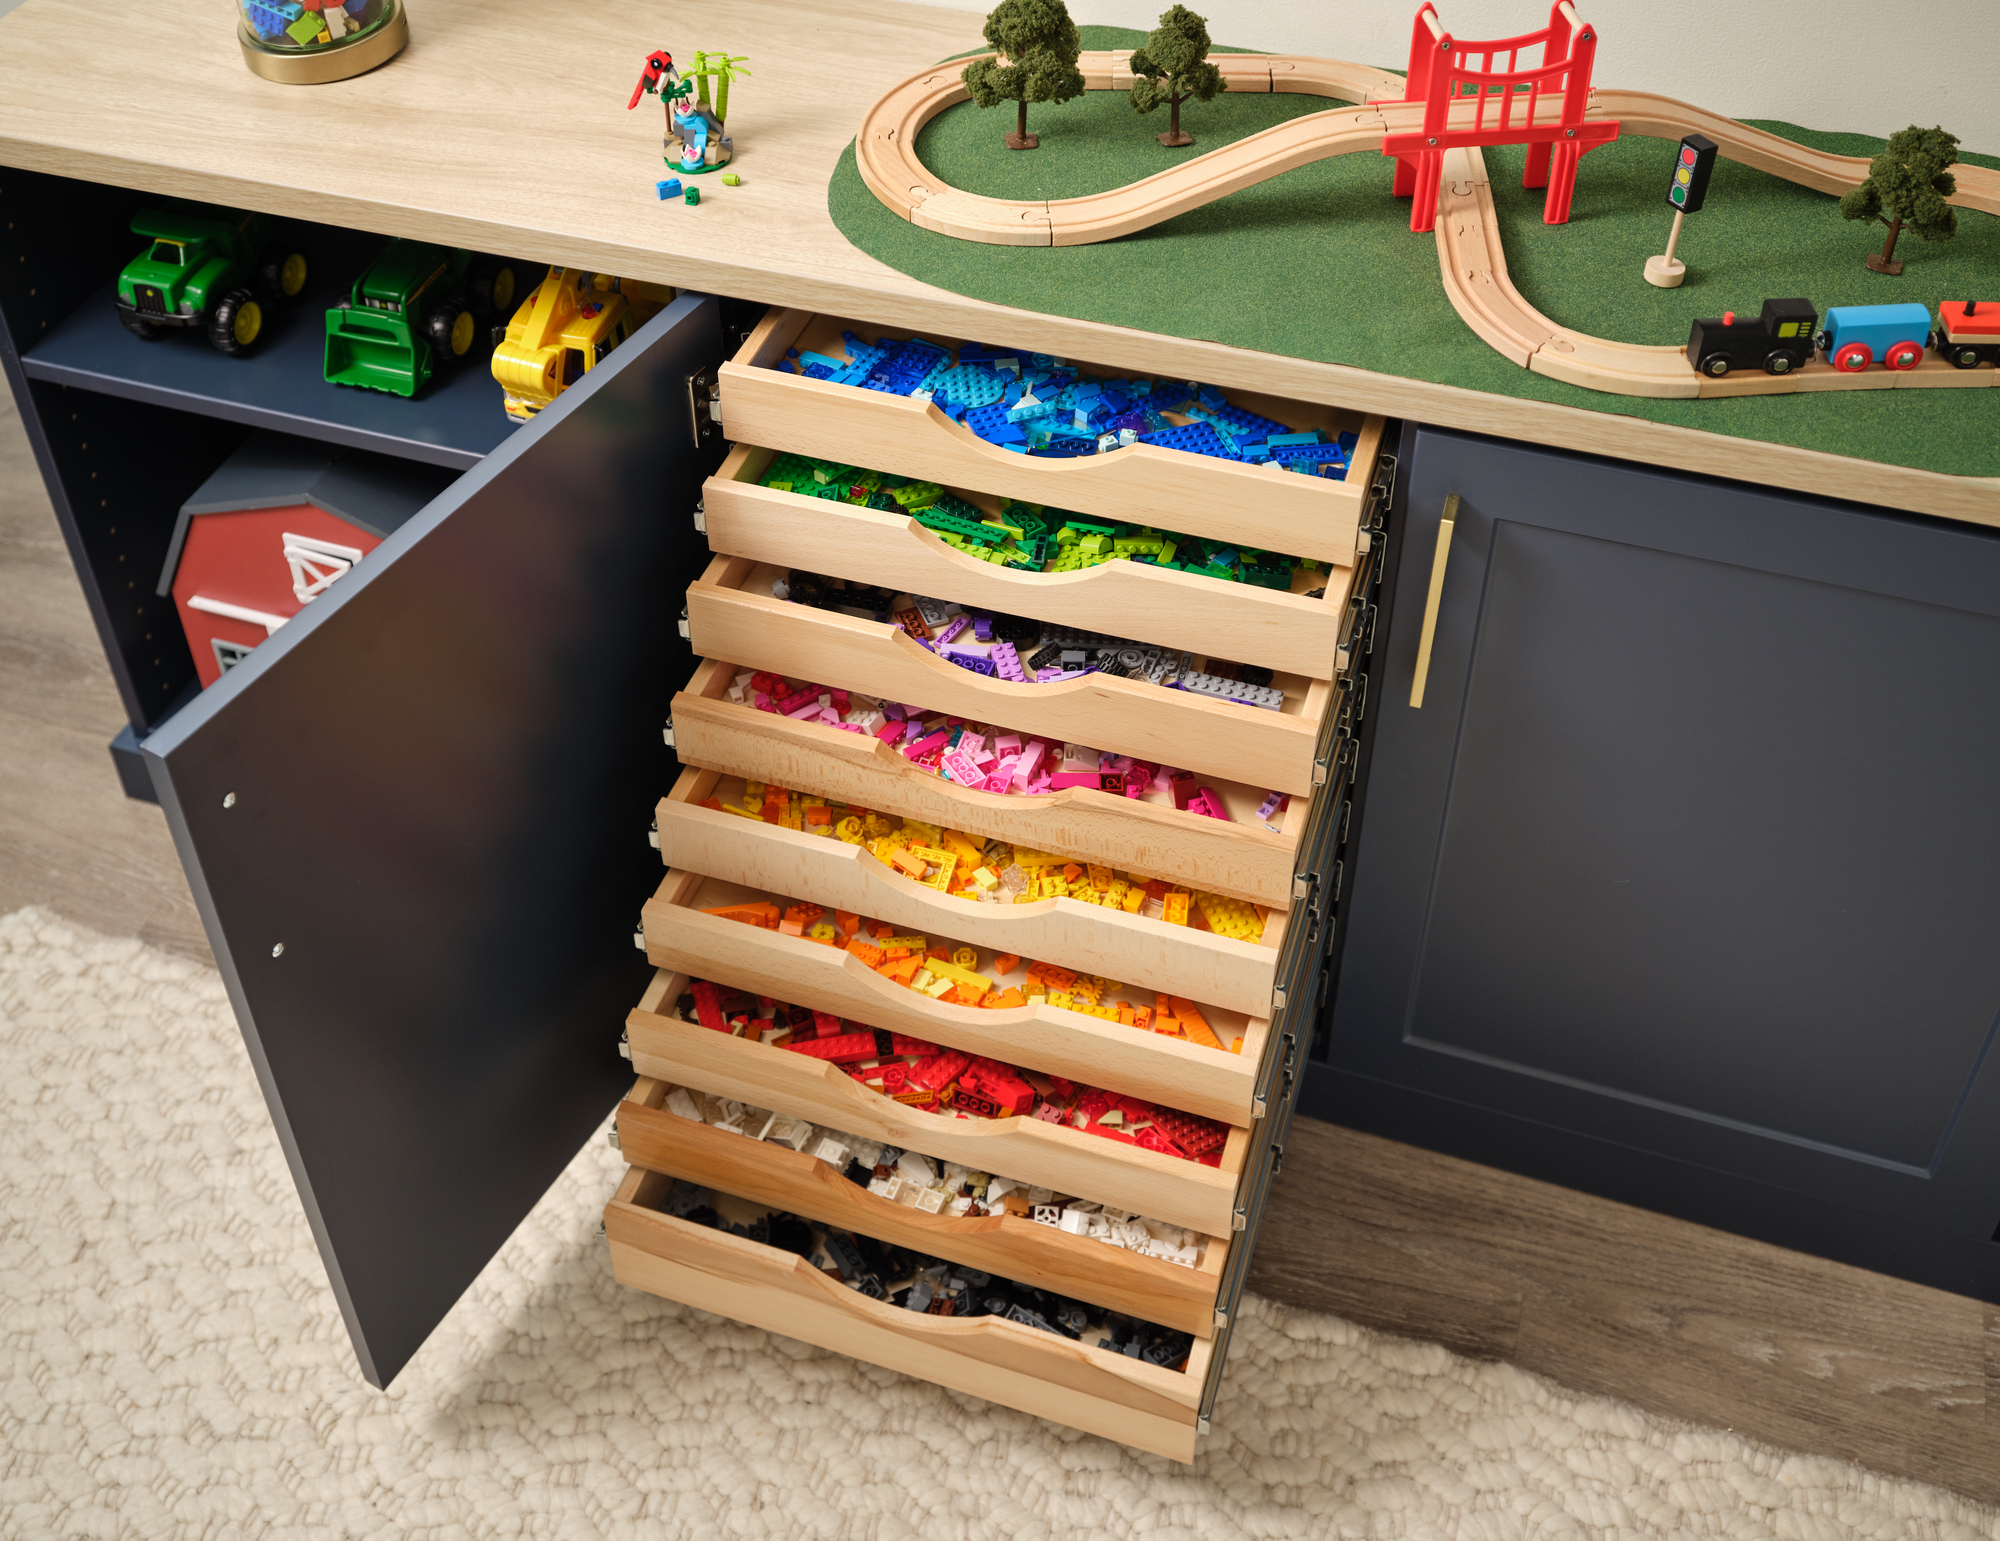 Kids Lego storage ideas for Inspired Closets scoop front beech drawers